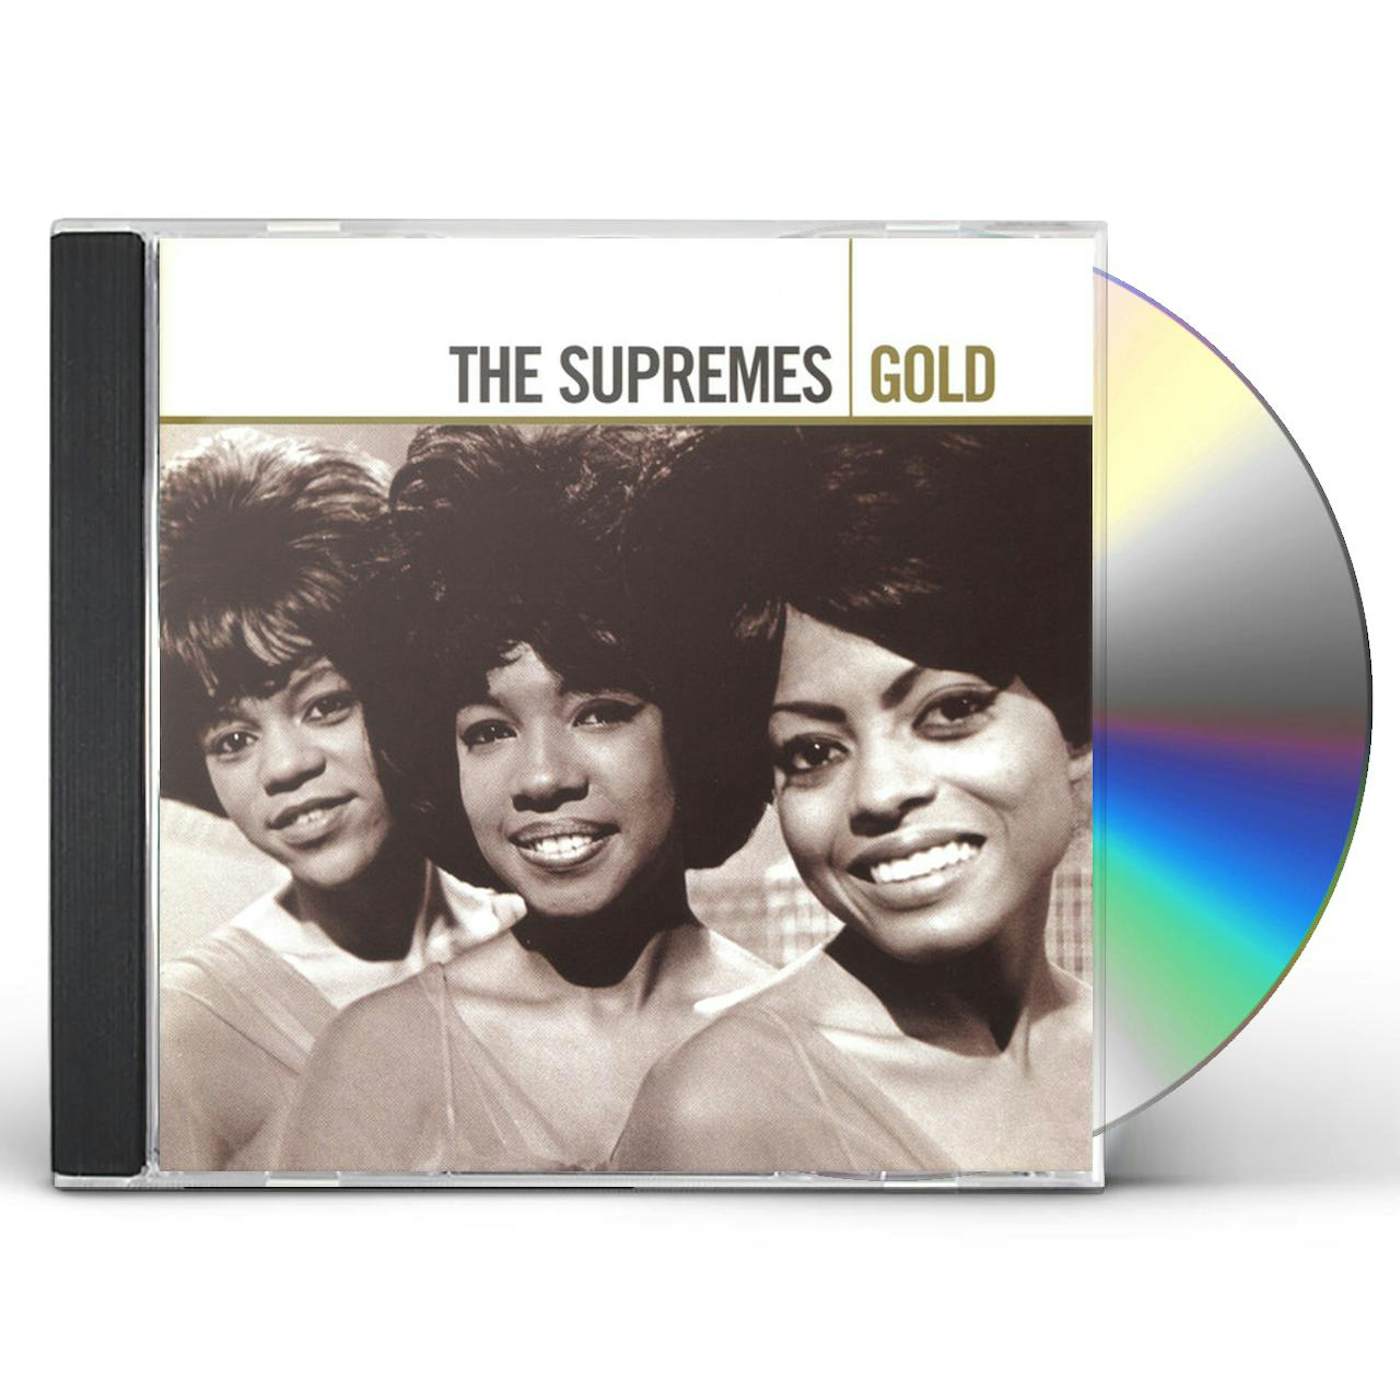 The Supremes GOLD CD